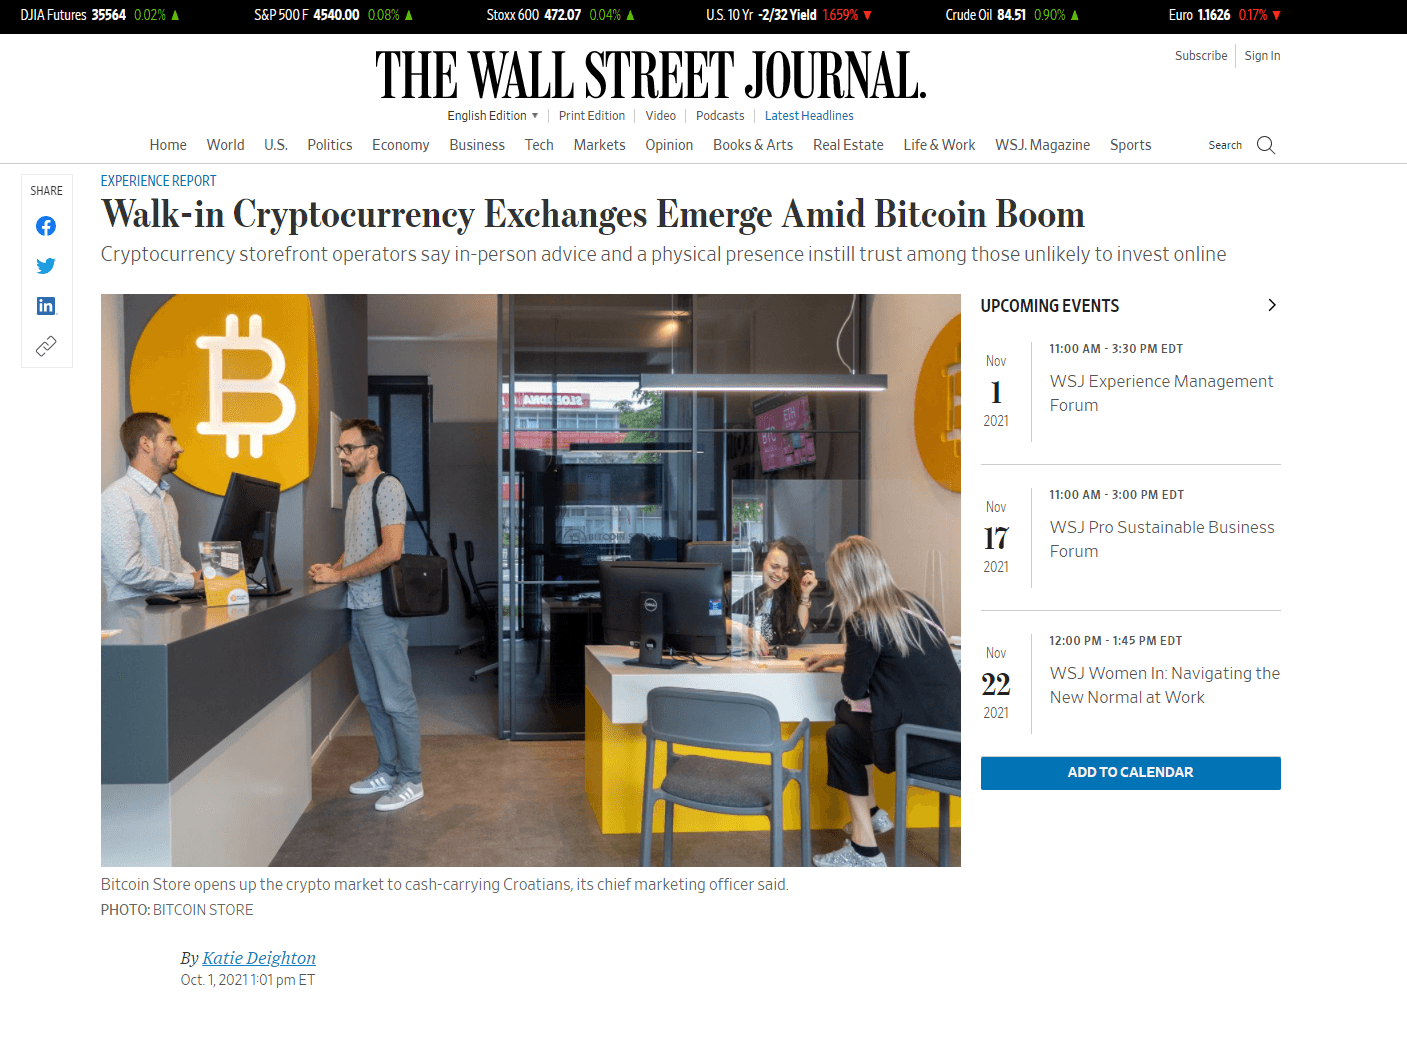 The Wall Street Journal article about brick-and-mortar cryptocurrency exchanges.